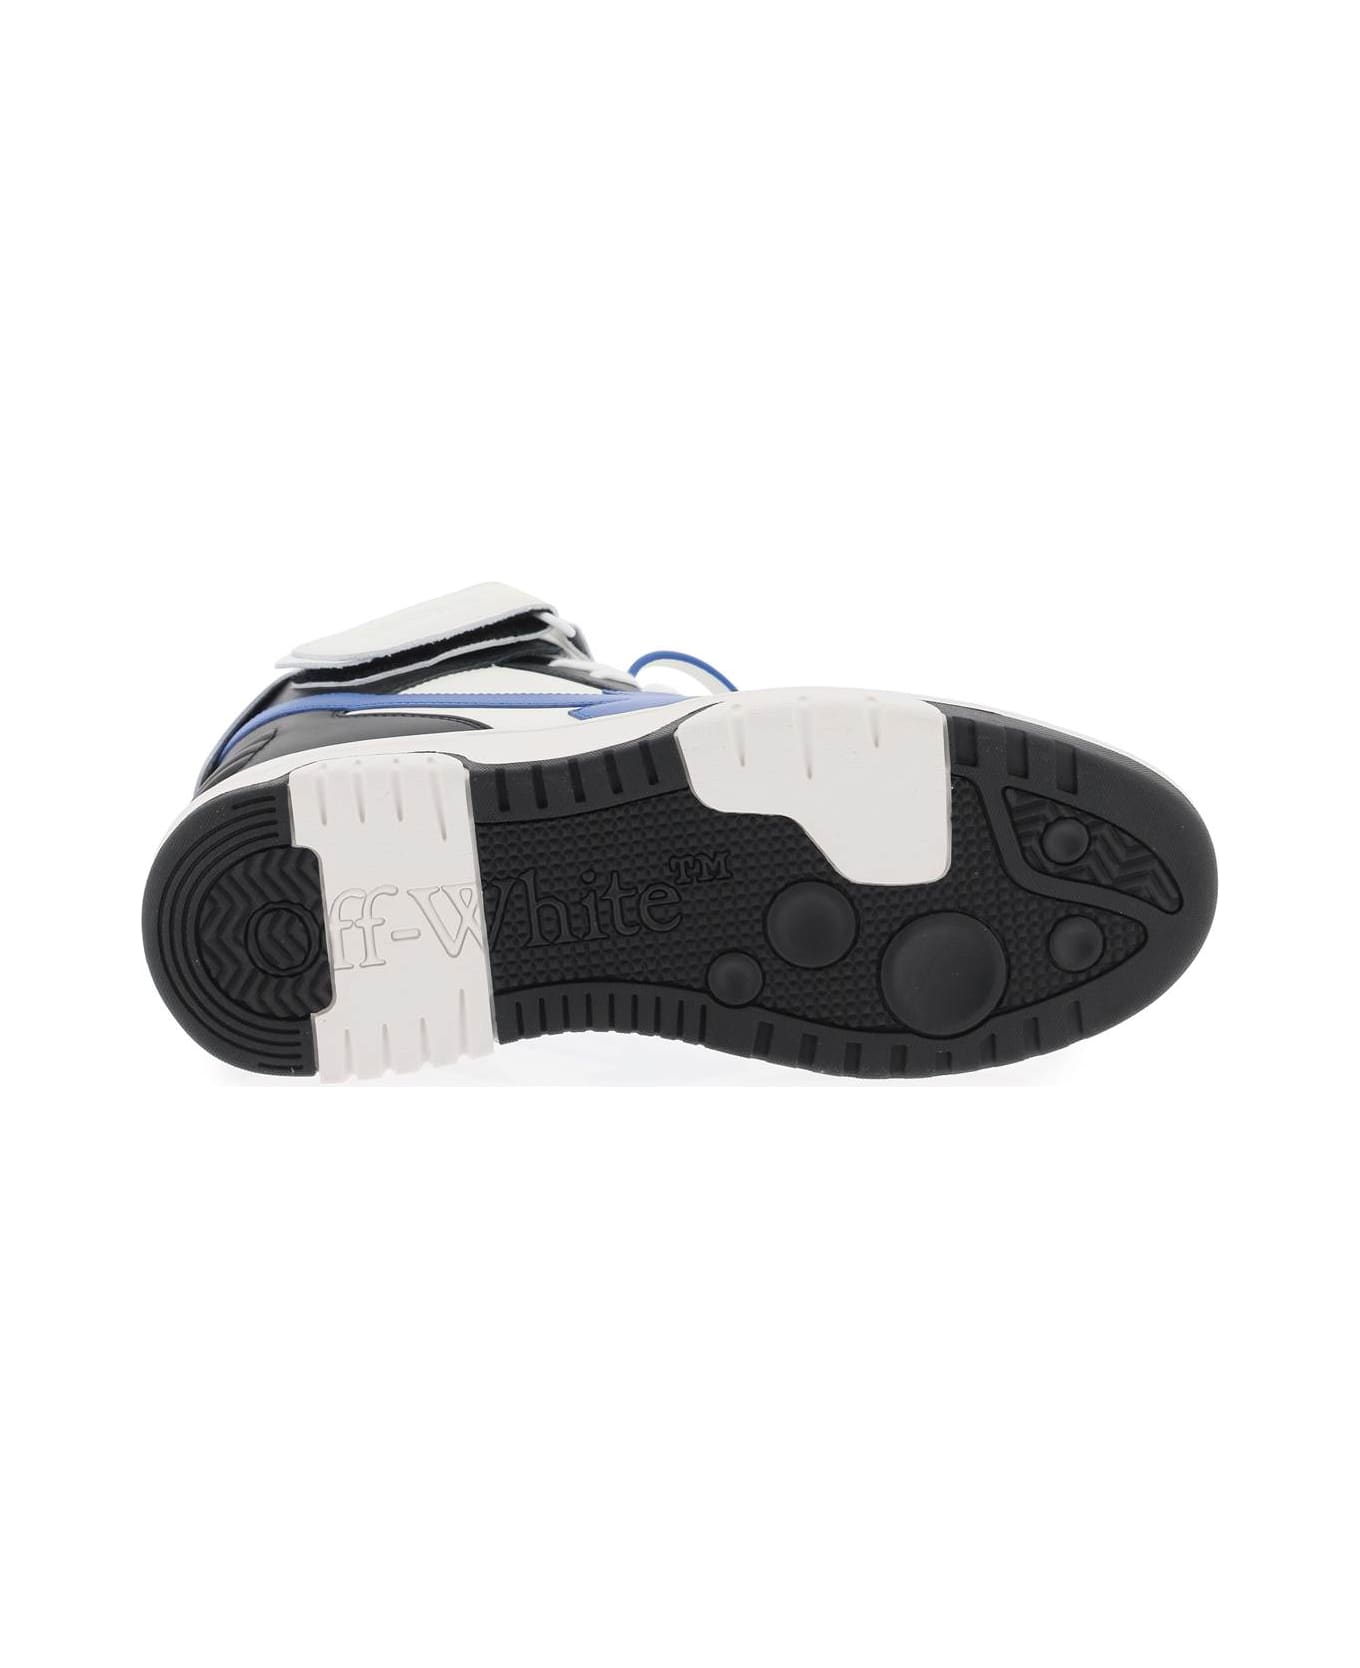 Off-White Out Of Office Sneakers - BLACK NAVY BLU (White)